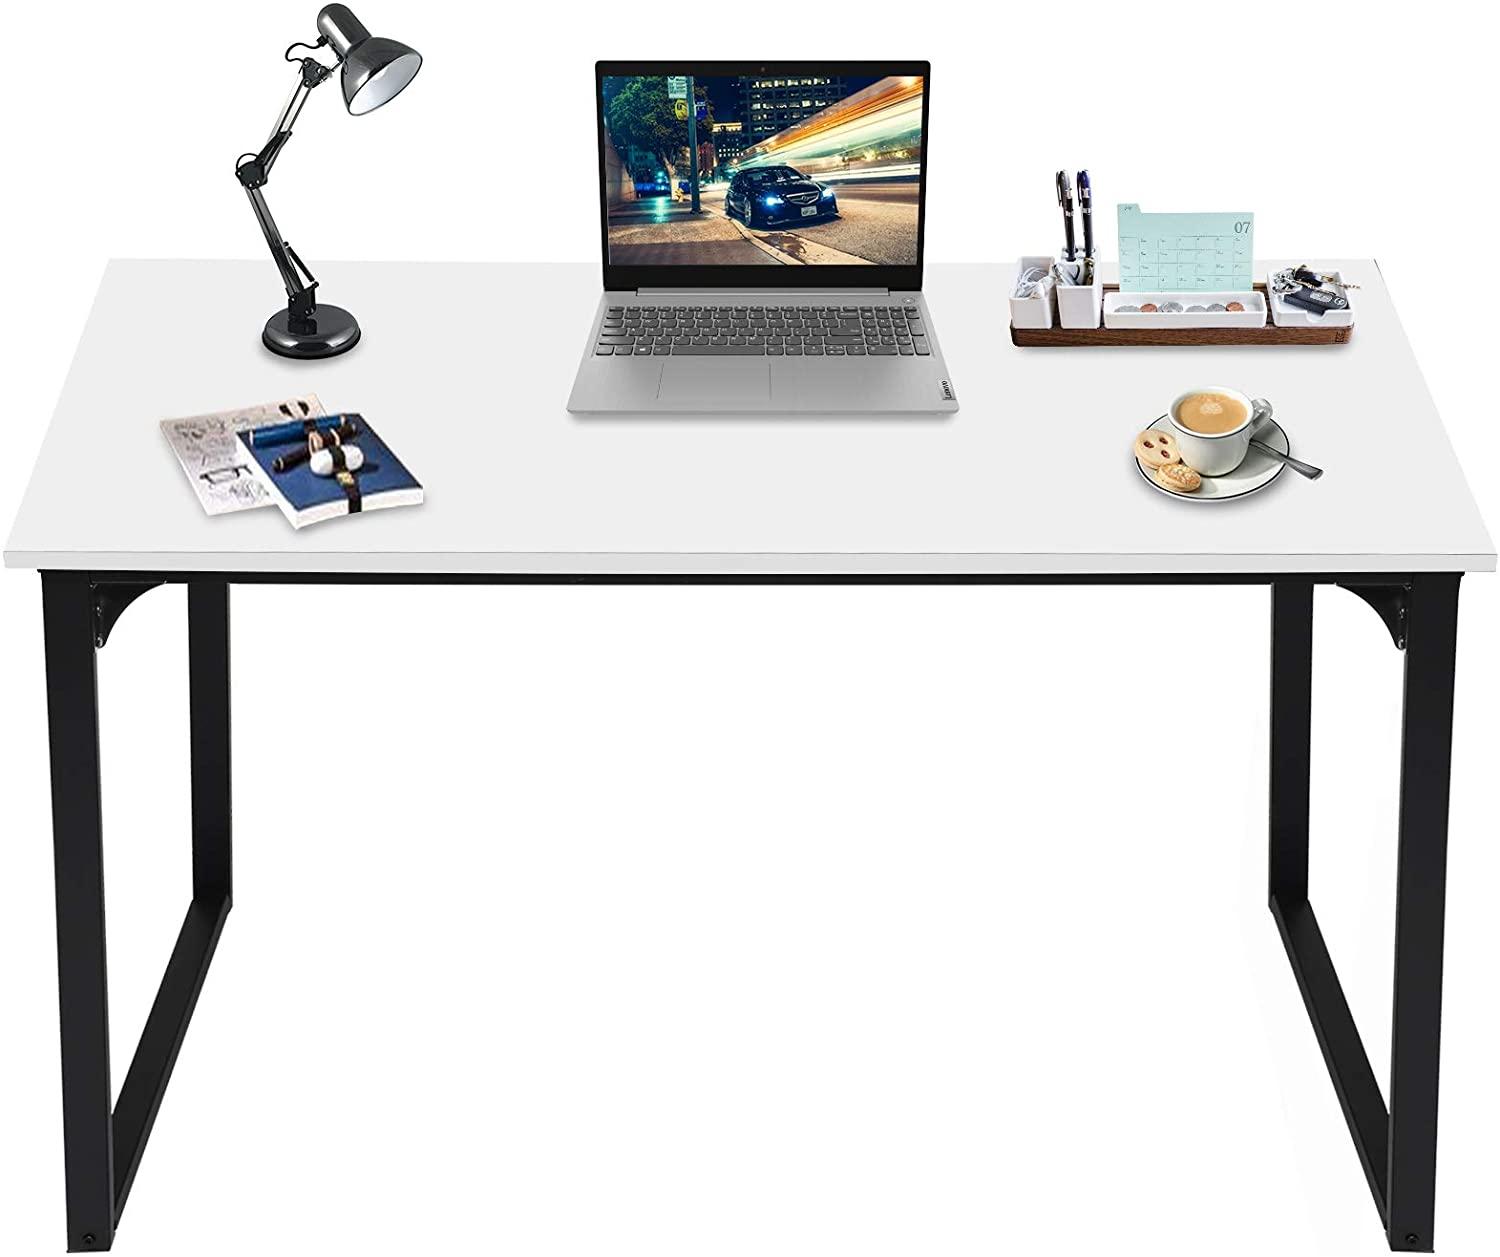 39in Kingso Small Computer Desk for $28.69 Shipped